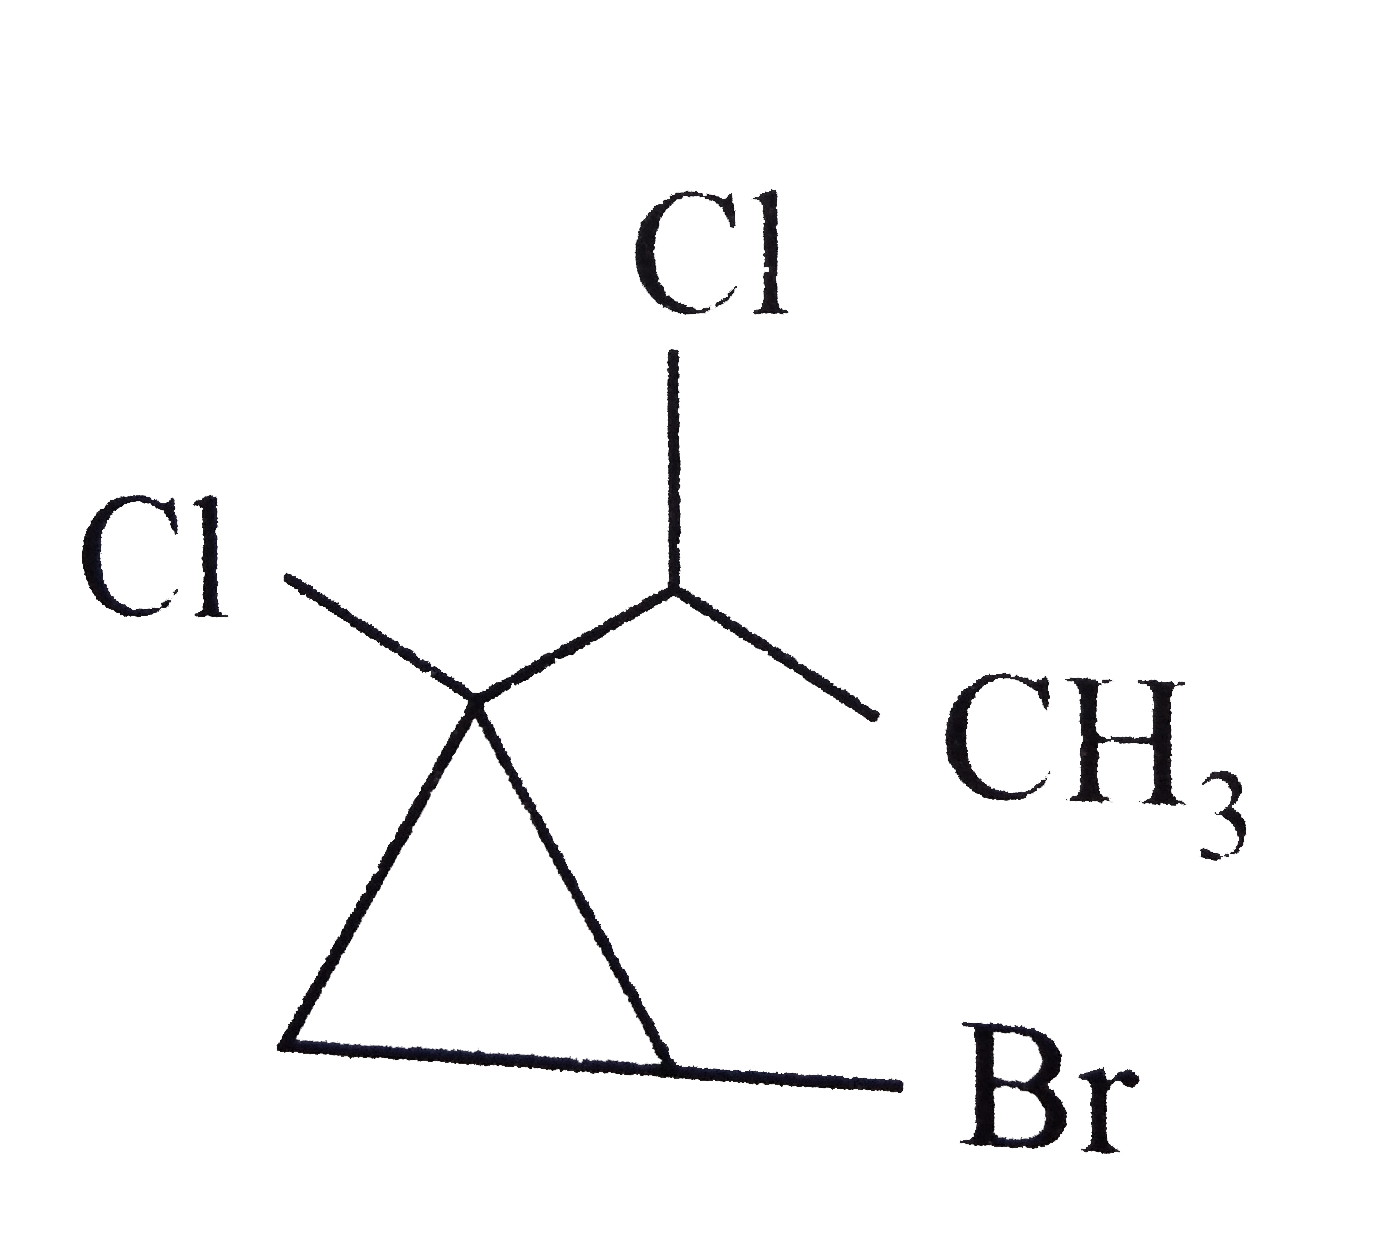 The correct IUPAC name of the compound shown in below is